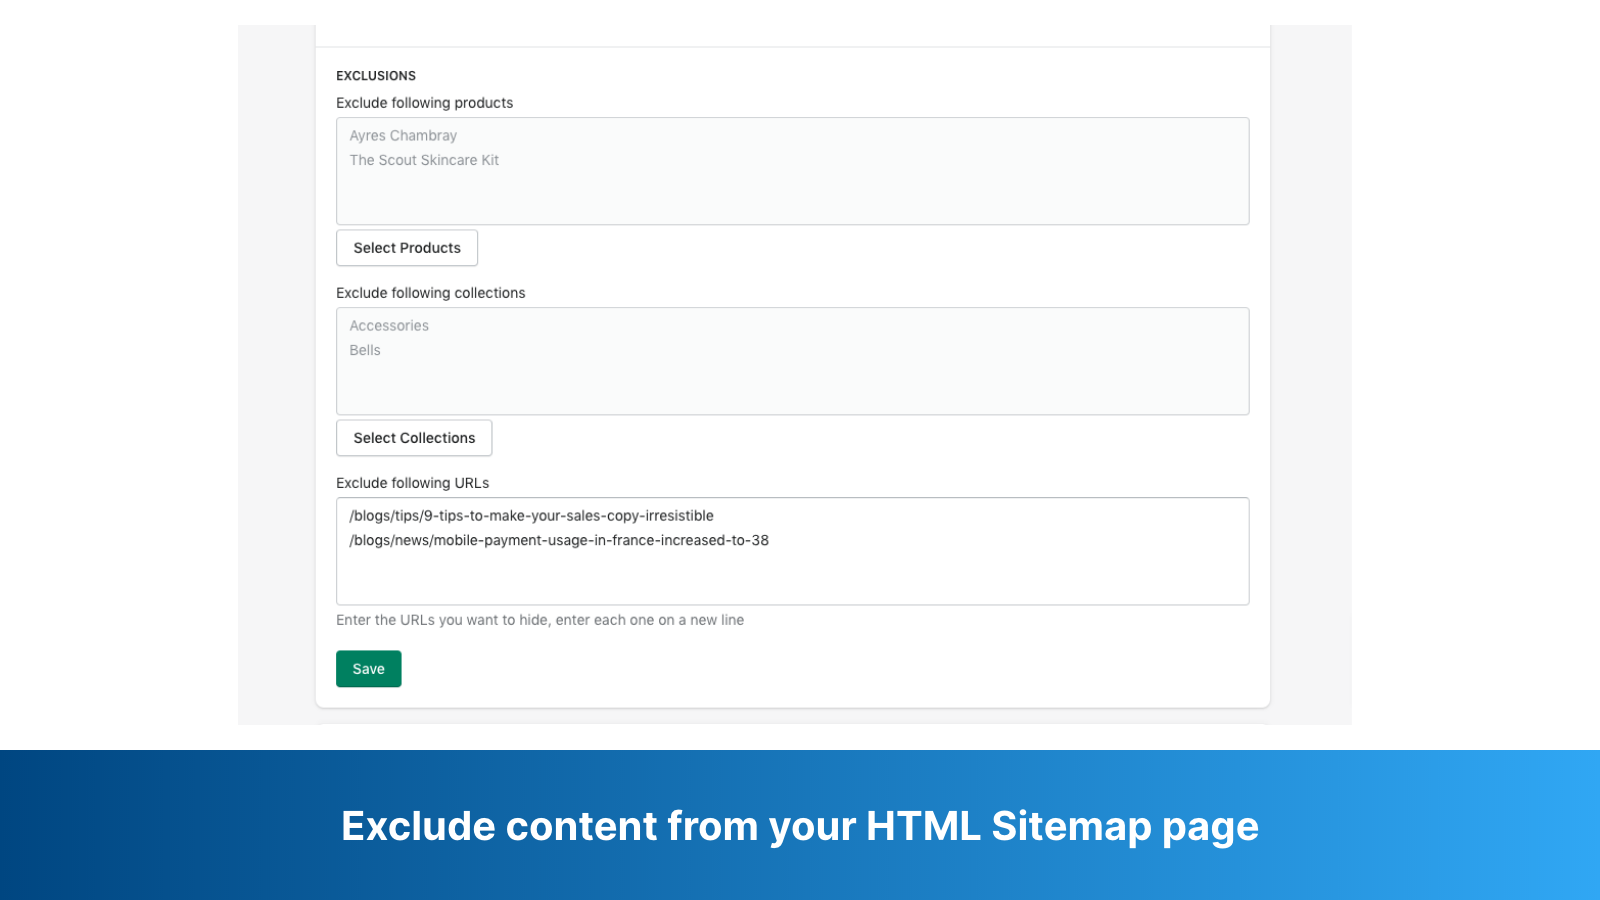 Exclude content from your HTML Sitemap page